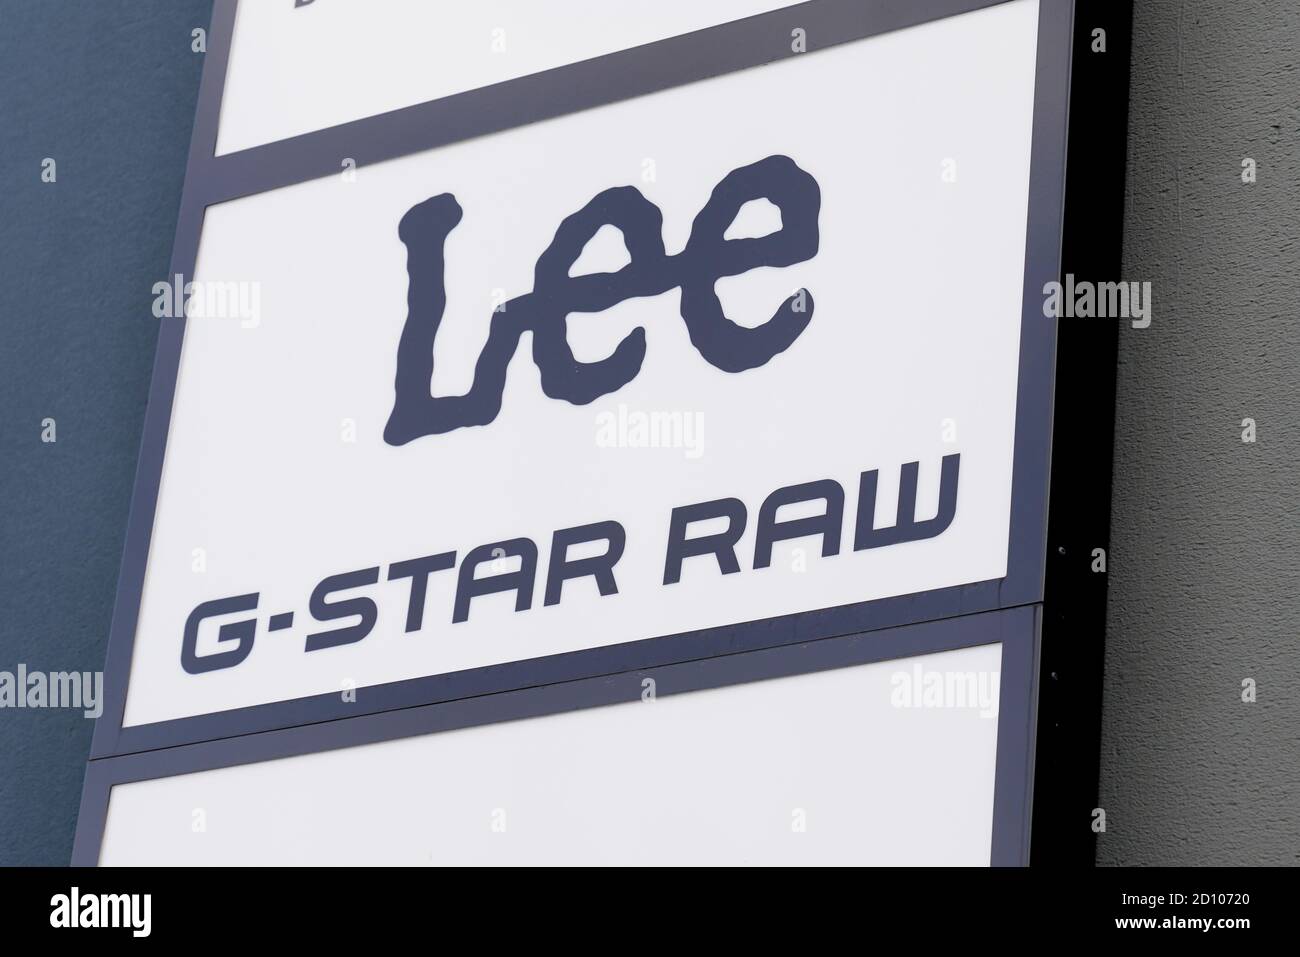 Bordeaux , Aquitaine / France - 10 01 2020 : Lee G-STAR RAW logo and text  sign on Jeans boutique store brand front of shop clothing fashion Stock  Photo - Alamy